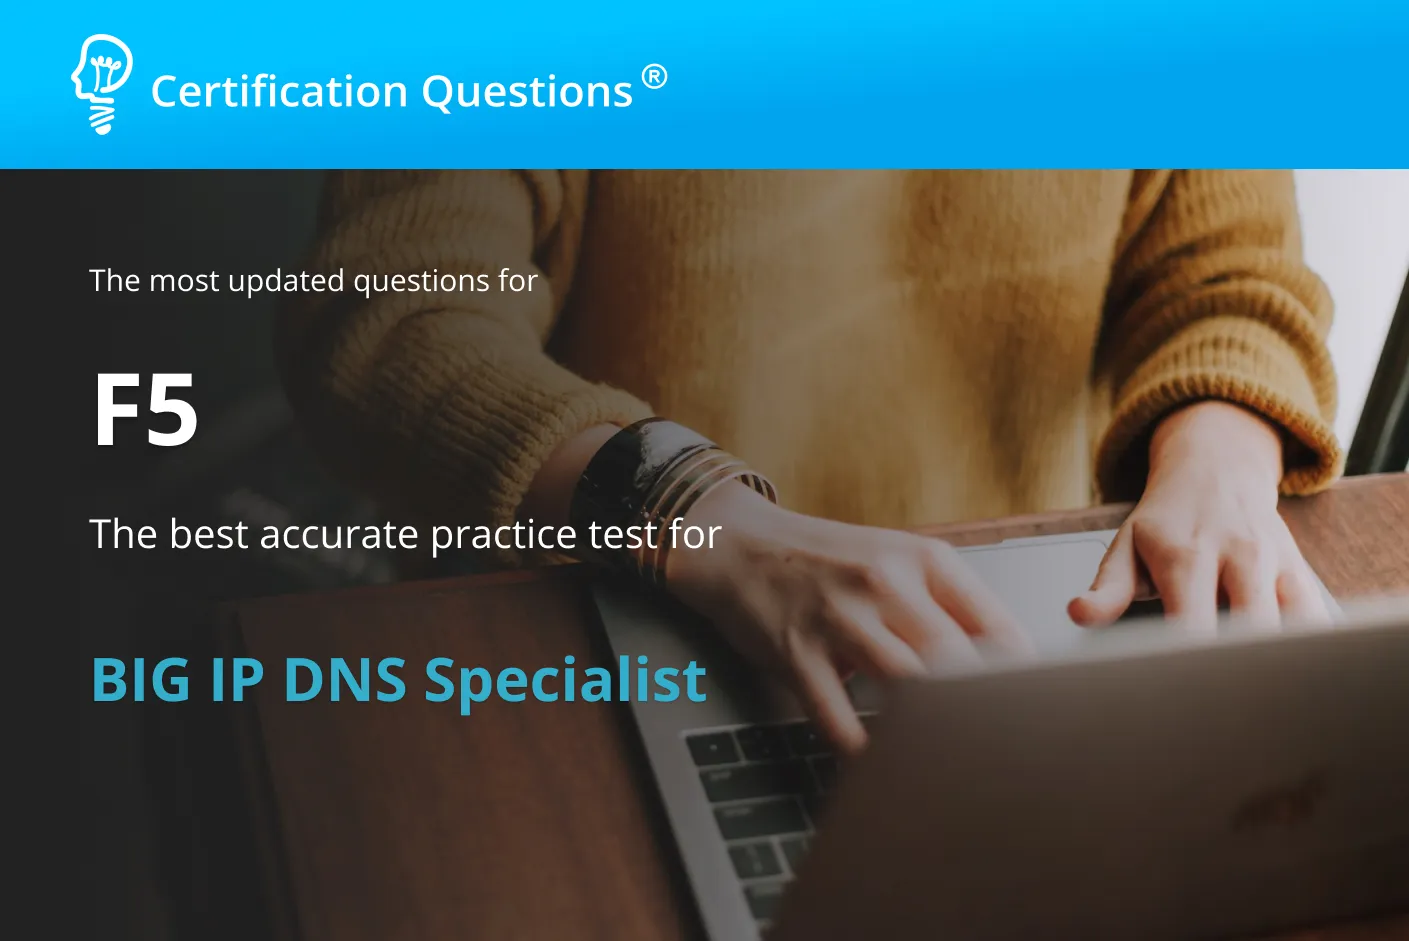 Here is the image for the exam 302 big IP DNS specialist test in the USA